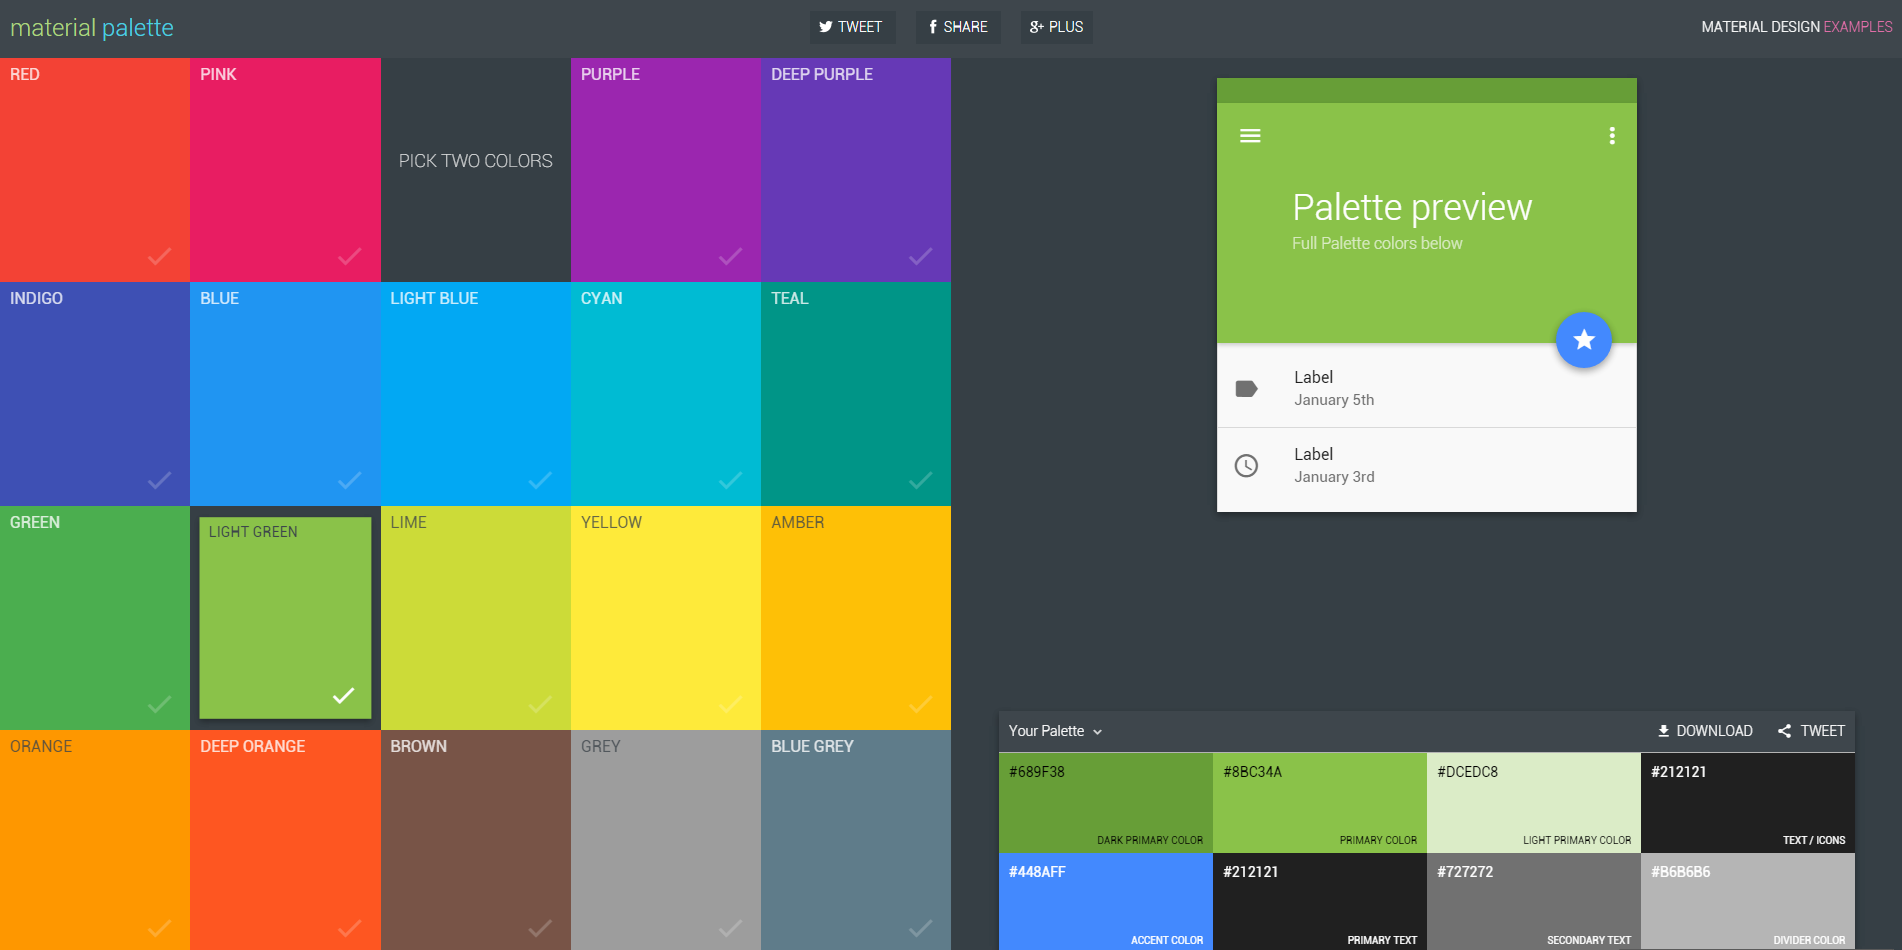 How to choose colors for Material Design app | by Marta Kakozwa | Medium